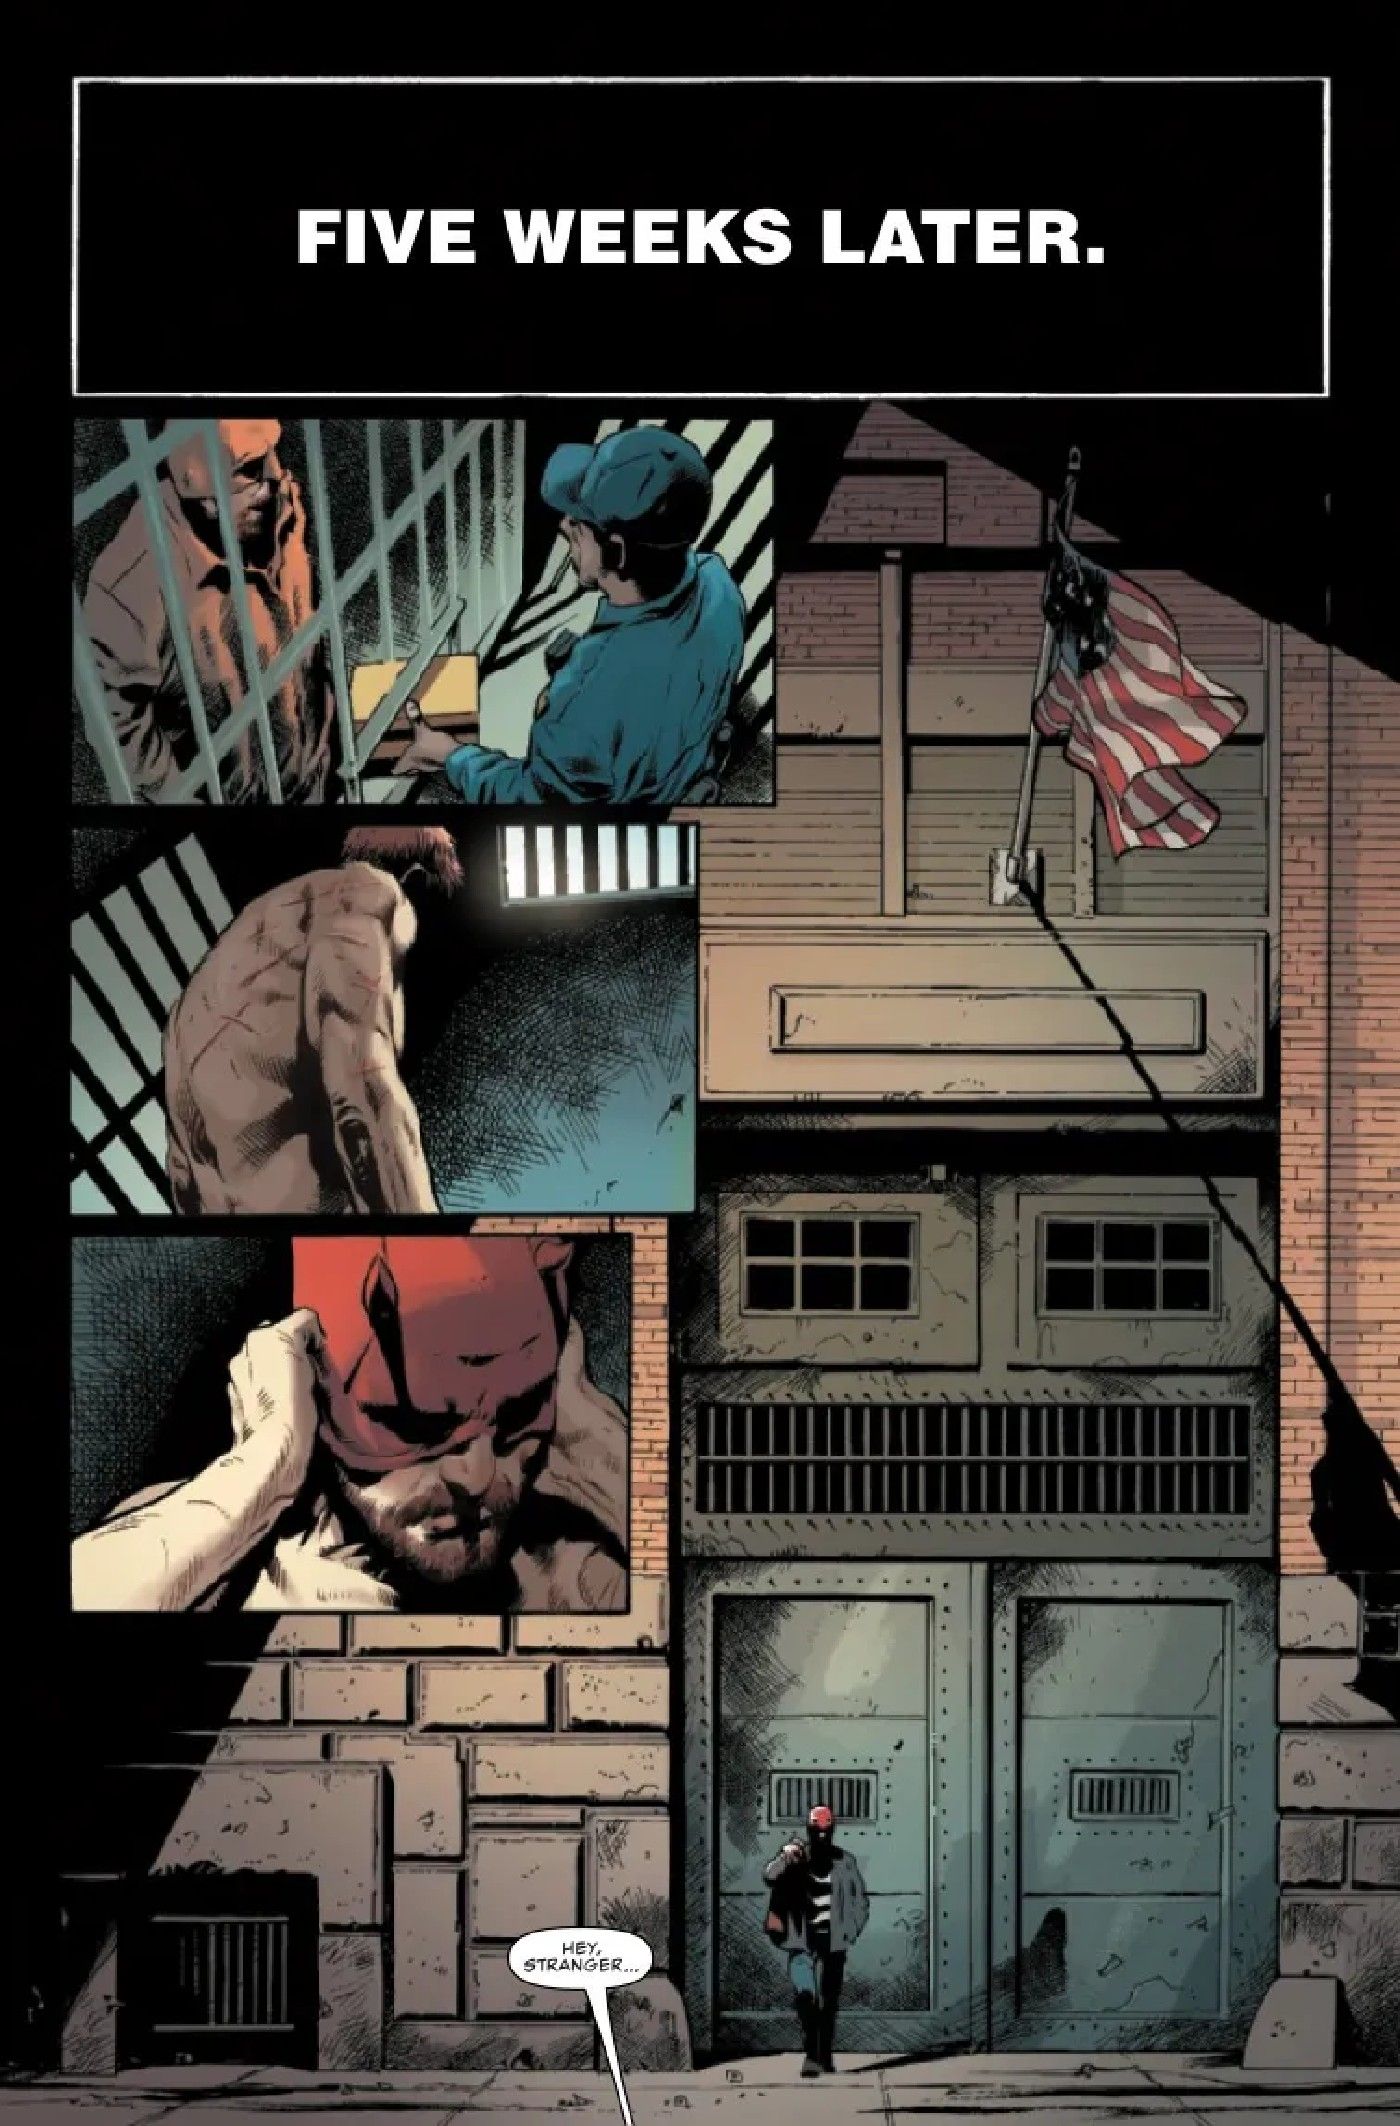 Daredevil is Finally Free But Hes Embracing a Dark New Path